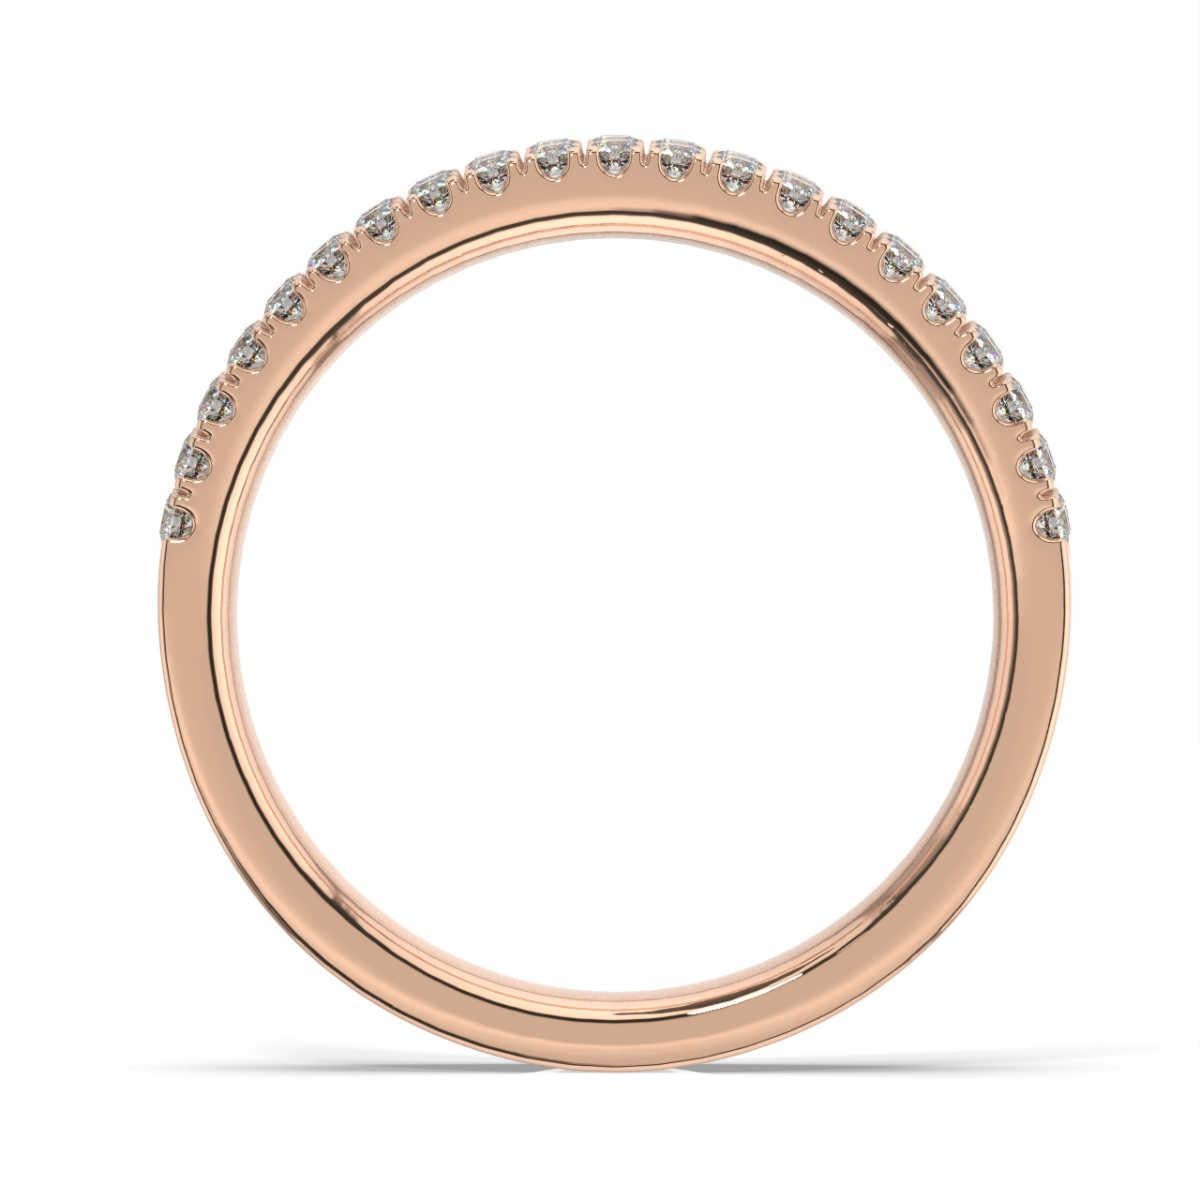 This band features two rows of Micro- Prong-set round brilliant diamonds. Experience the difference

Product details: 

Center Gemstone Color: WHITE
Side Gemstone Type: NATURAL DIAMOND
Side Gemstone Shape: ROUND
Metal: 18K Rose Gold
Metal Weight: